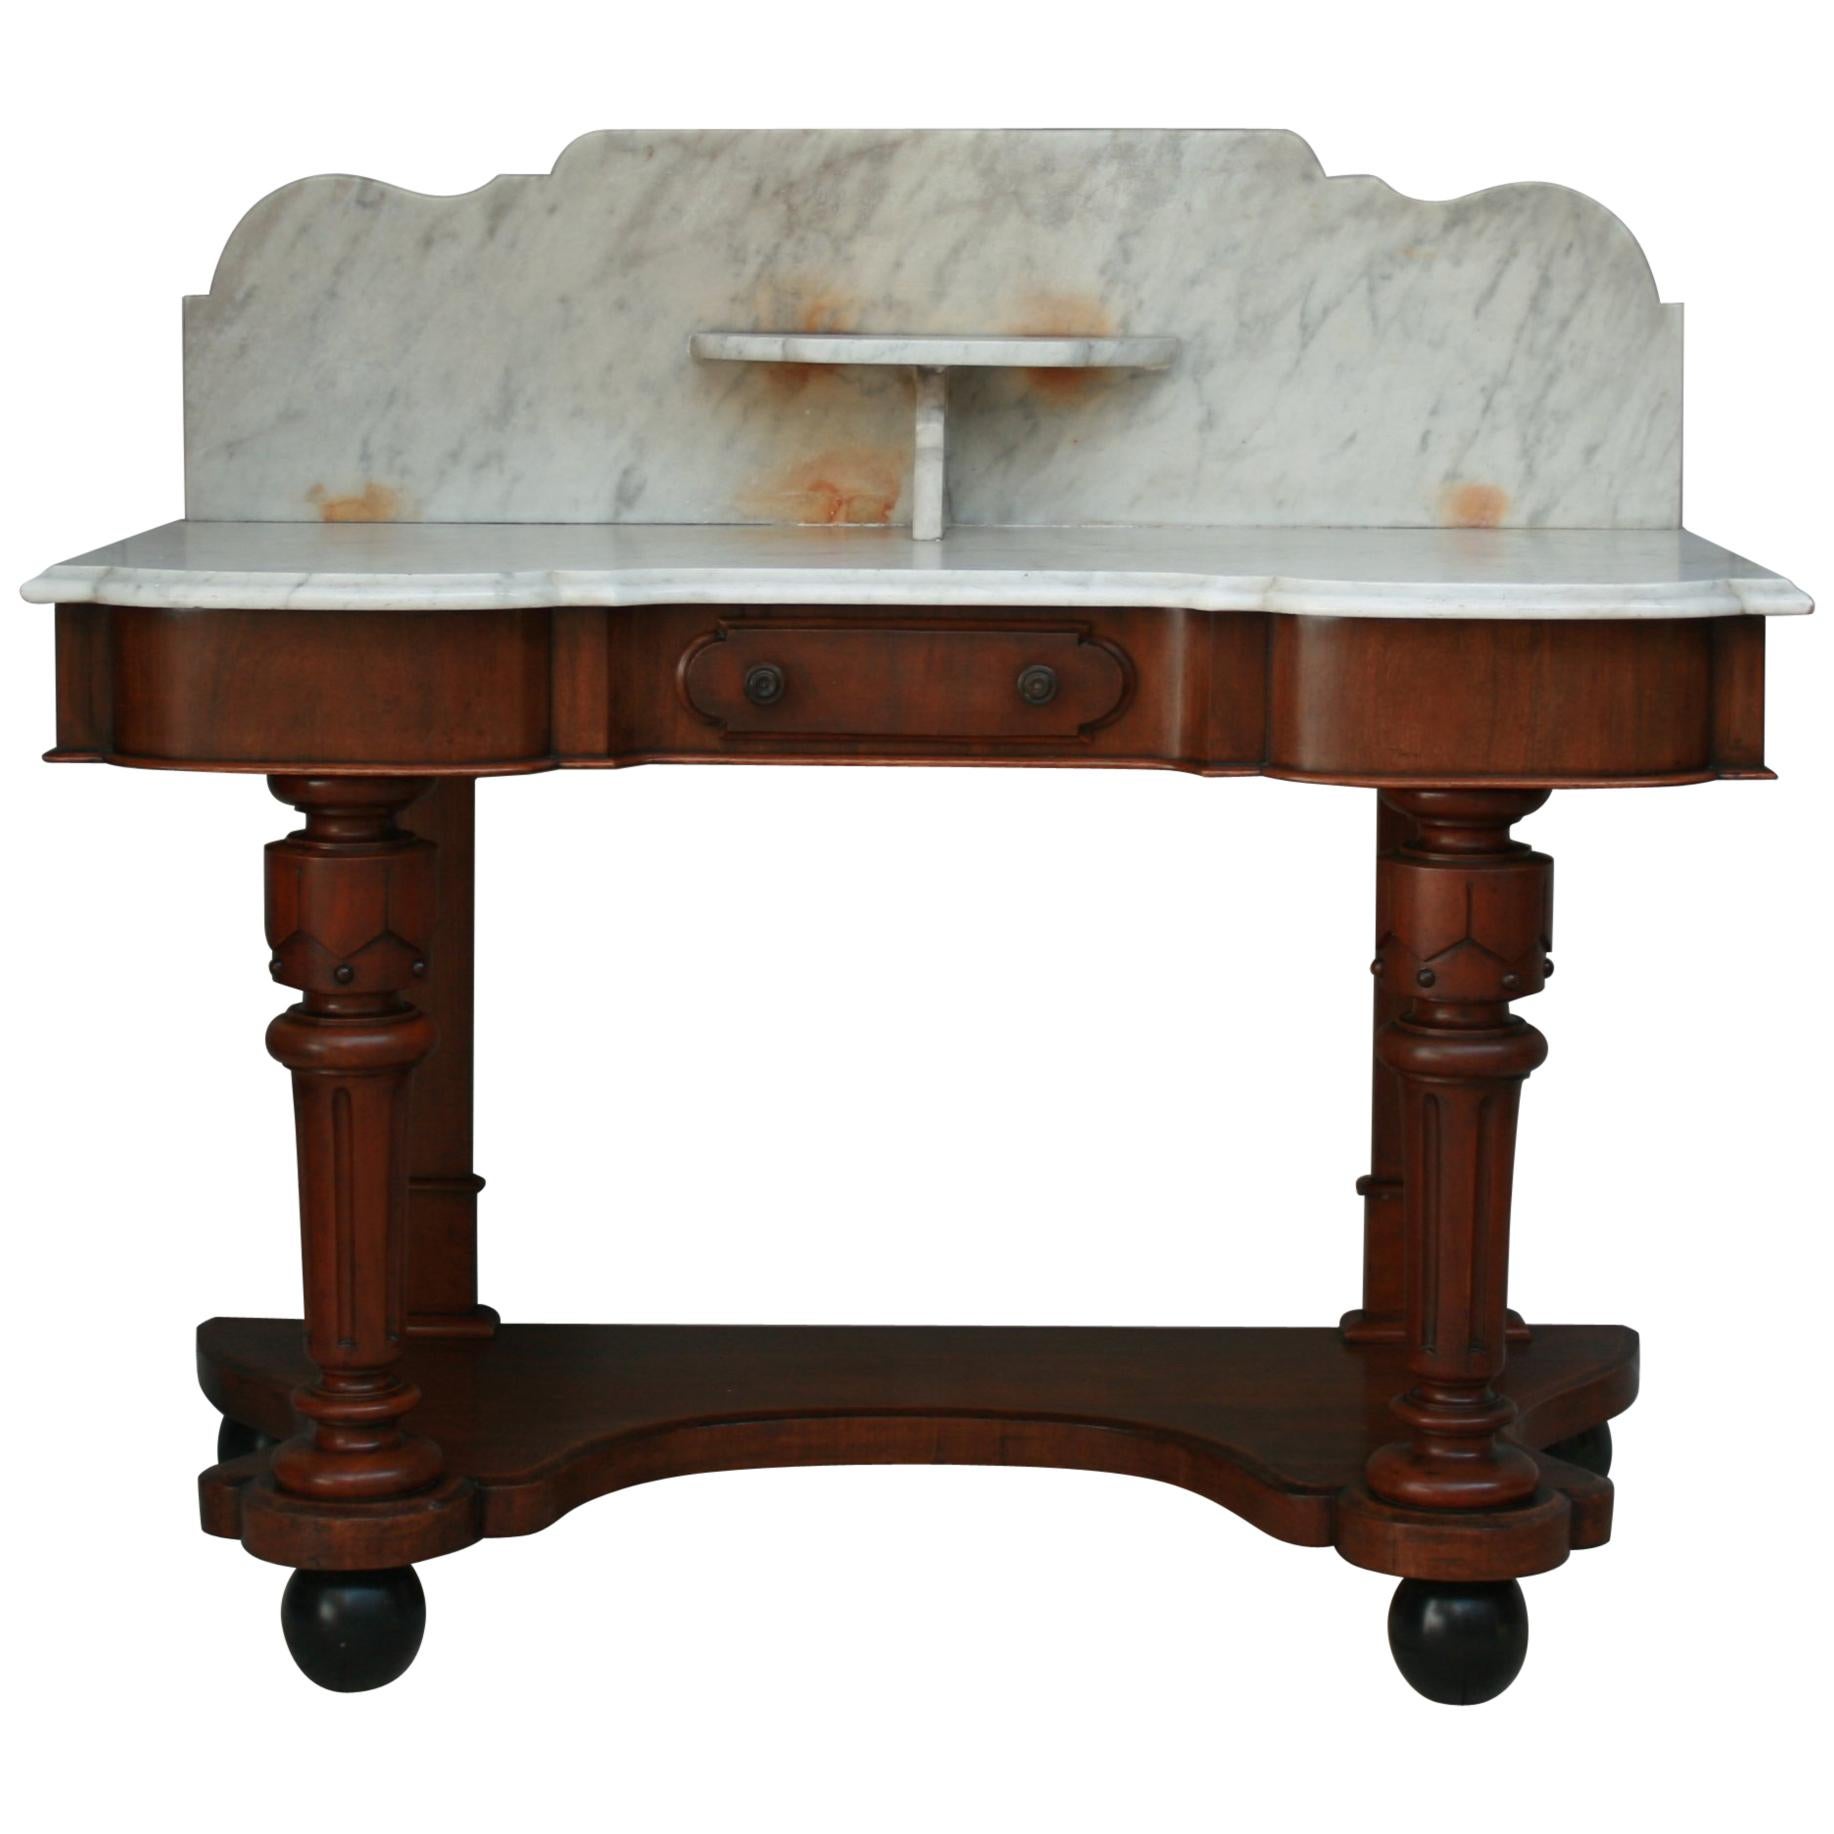 Antique Victorian Washstand, Mahogany and White Marble, 19th Century